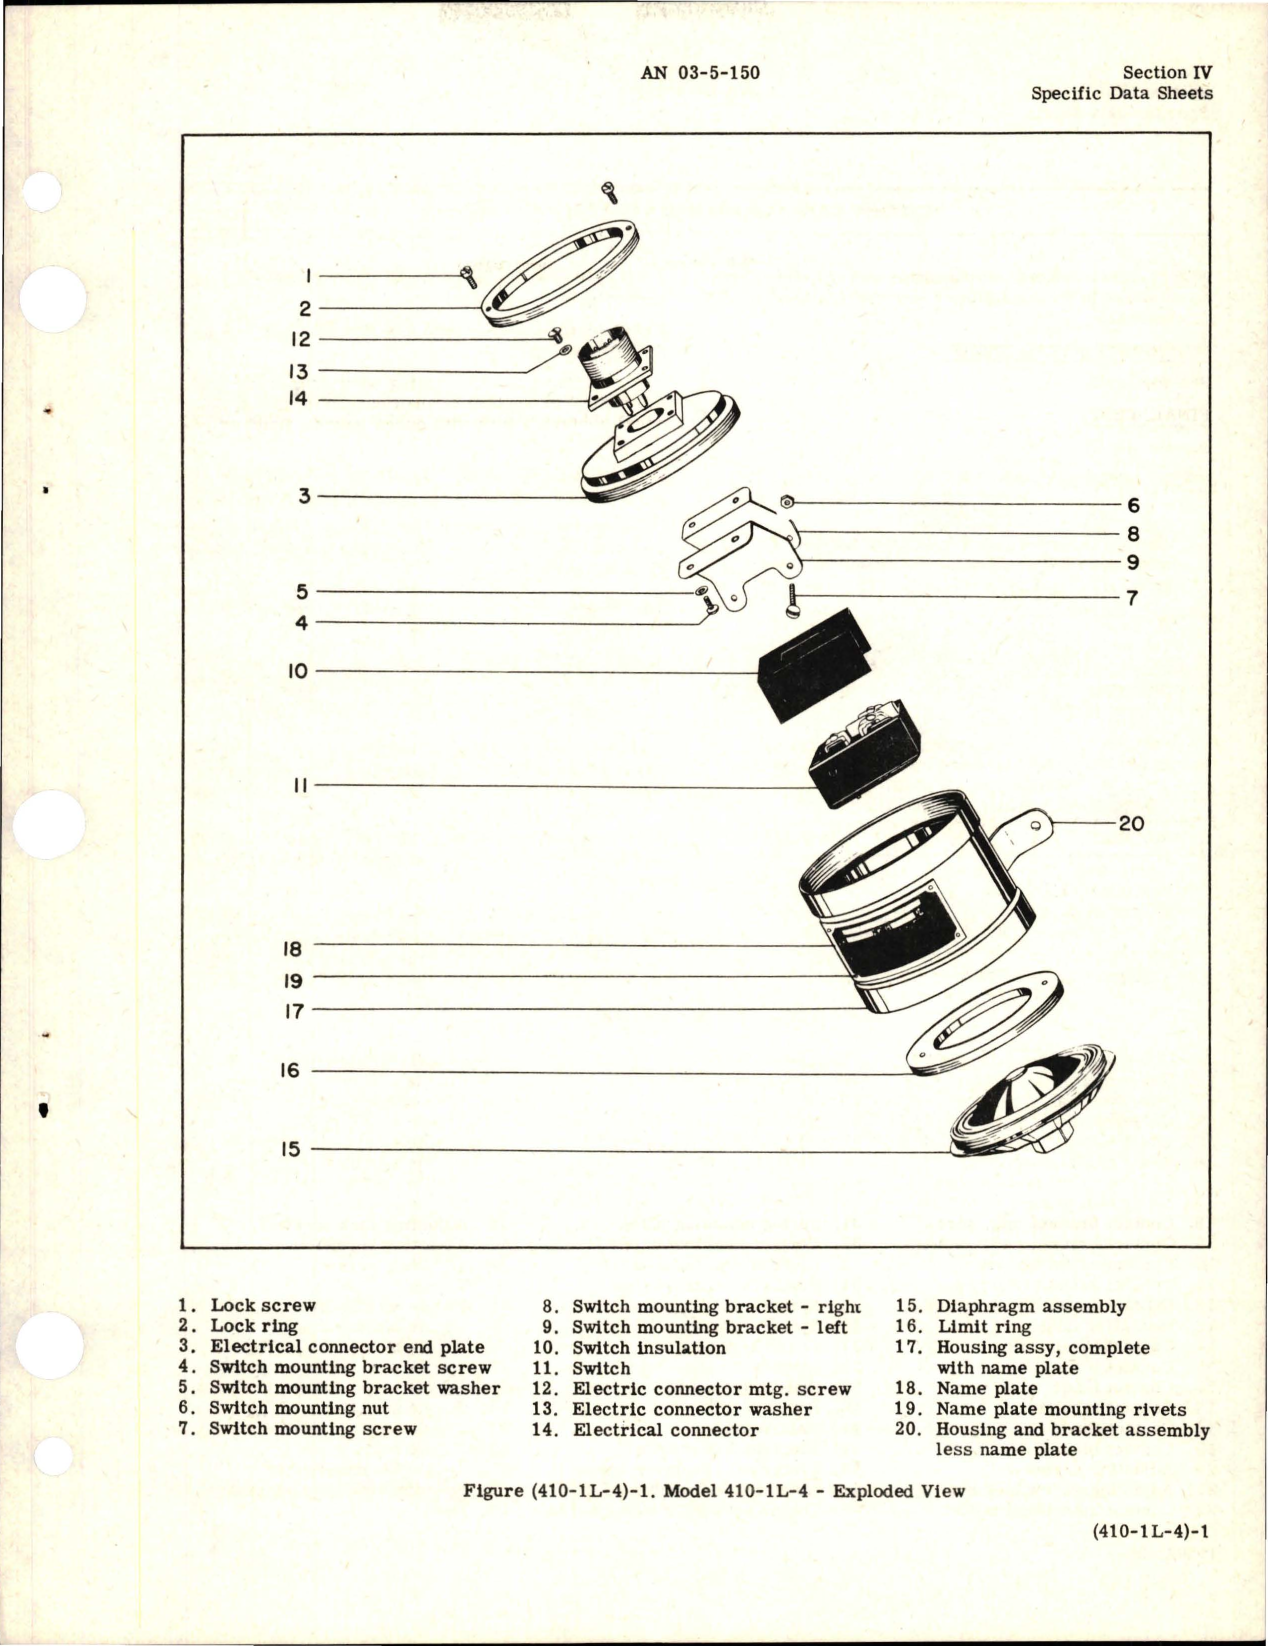 Sample page 9 from AirCorps Library document: Overhaul Instructions for Pressure Actuated Switches